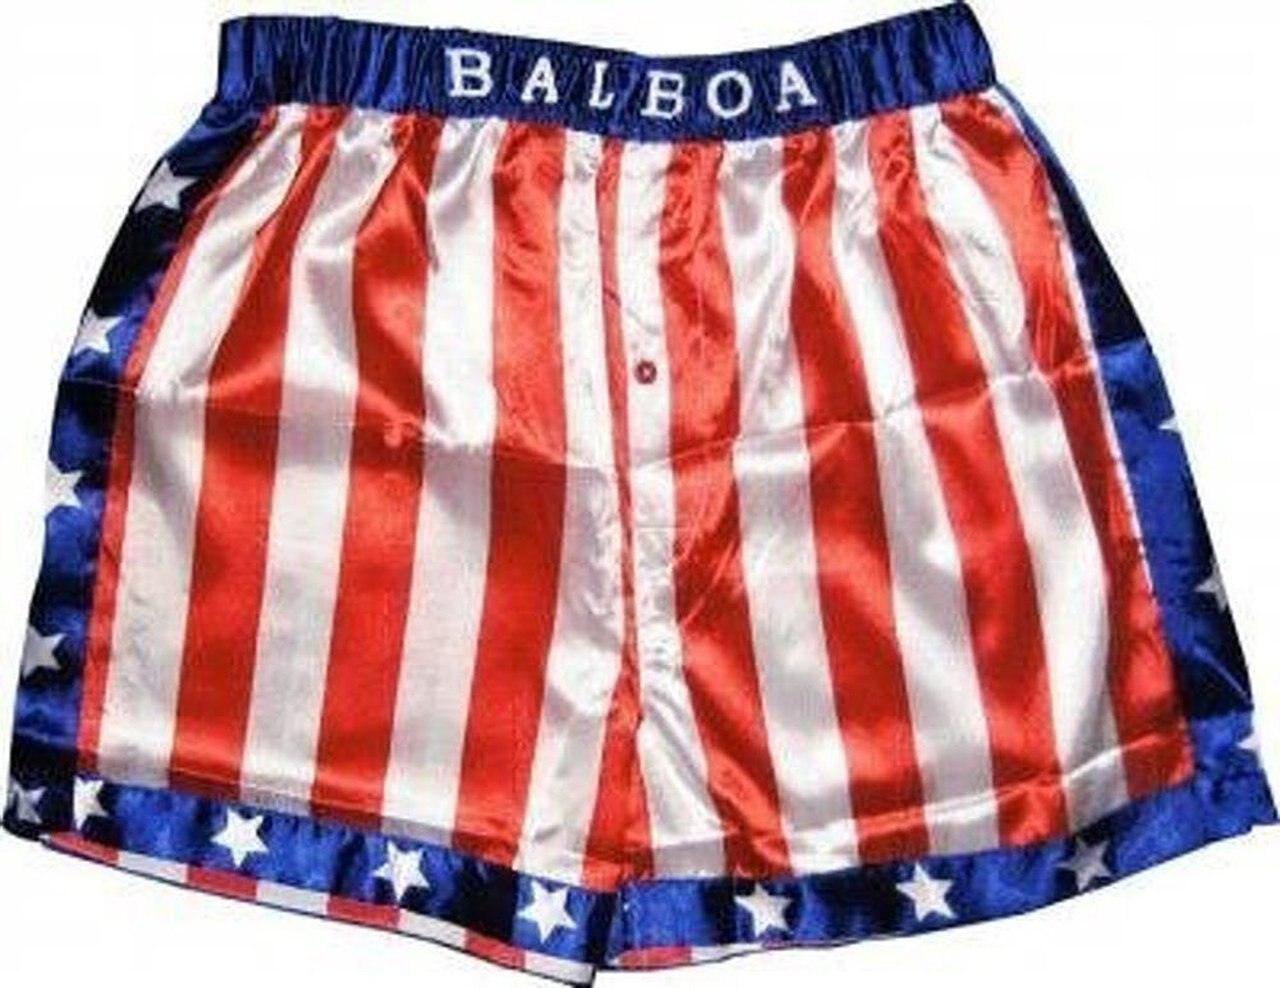 Happy Shorts Wide Boxer Shorts USA American Flag